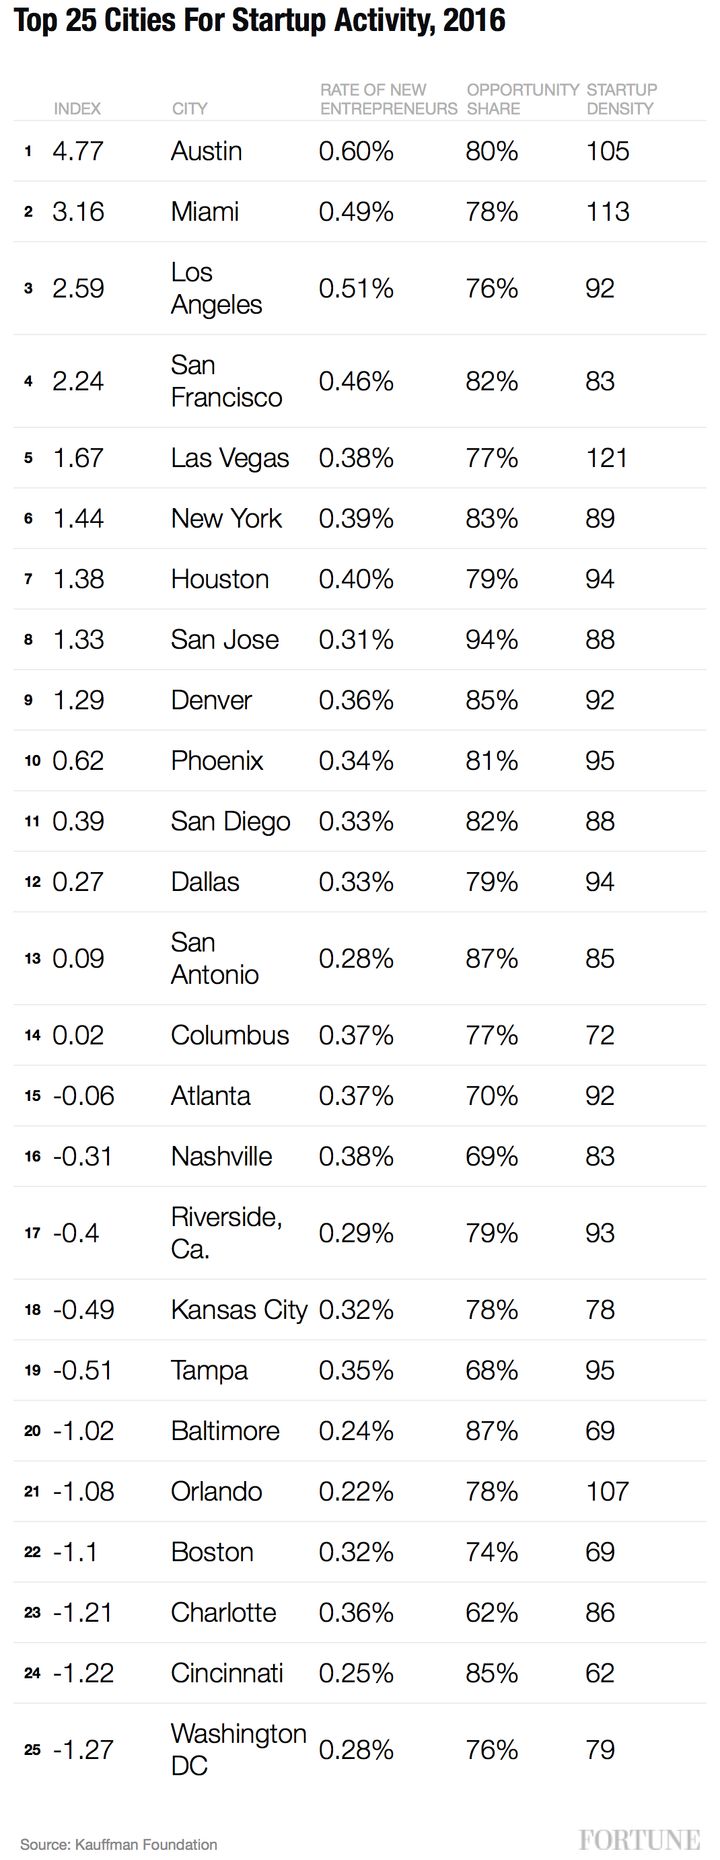 Top 25 cities for startups 